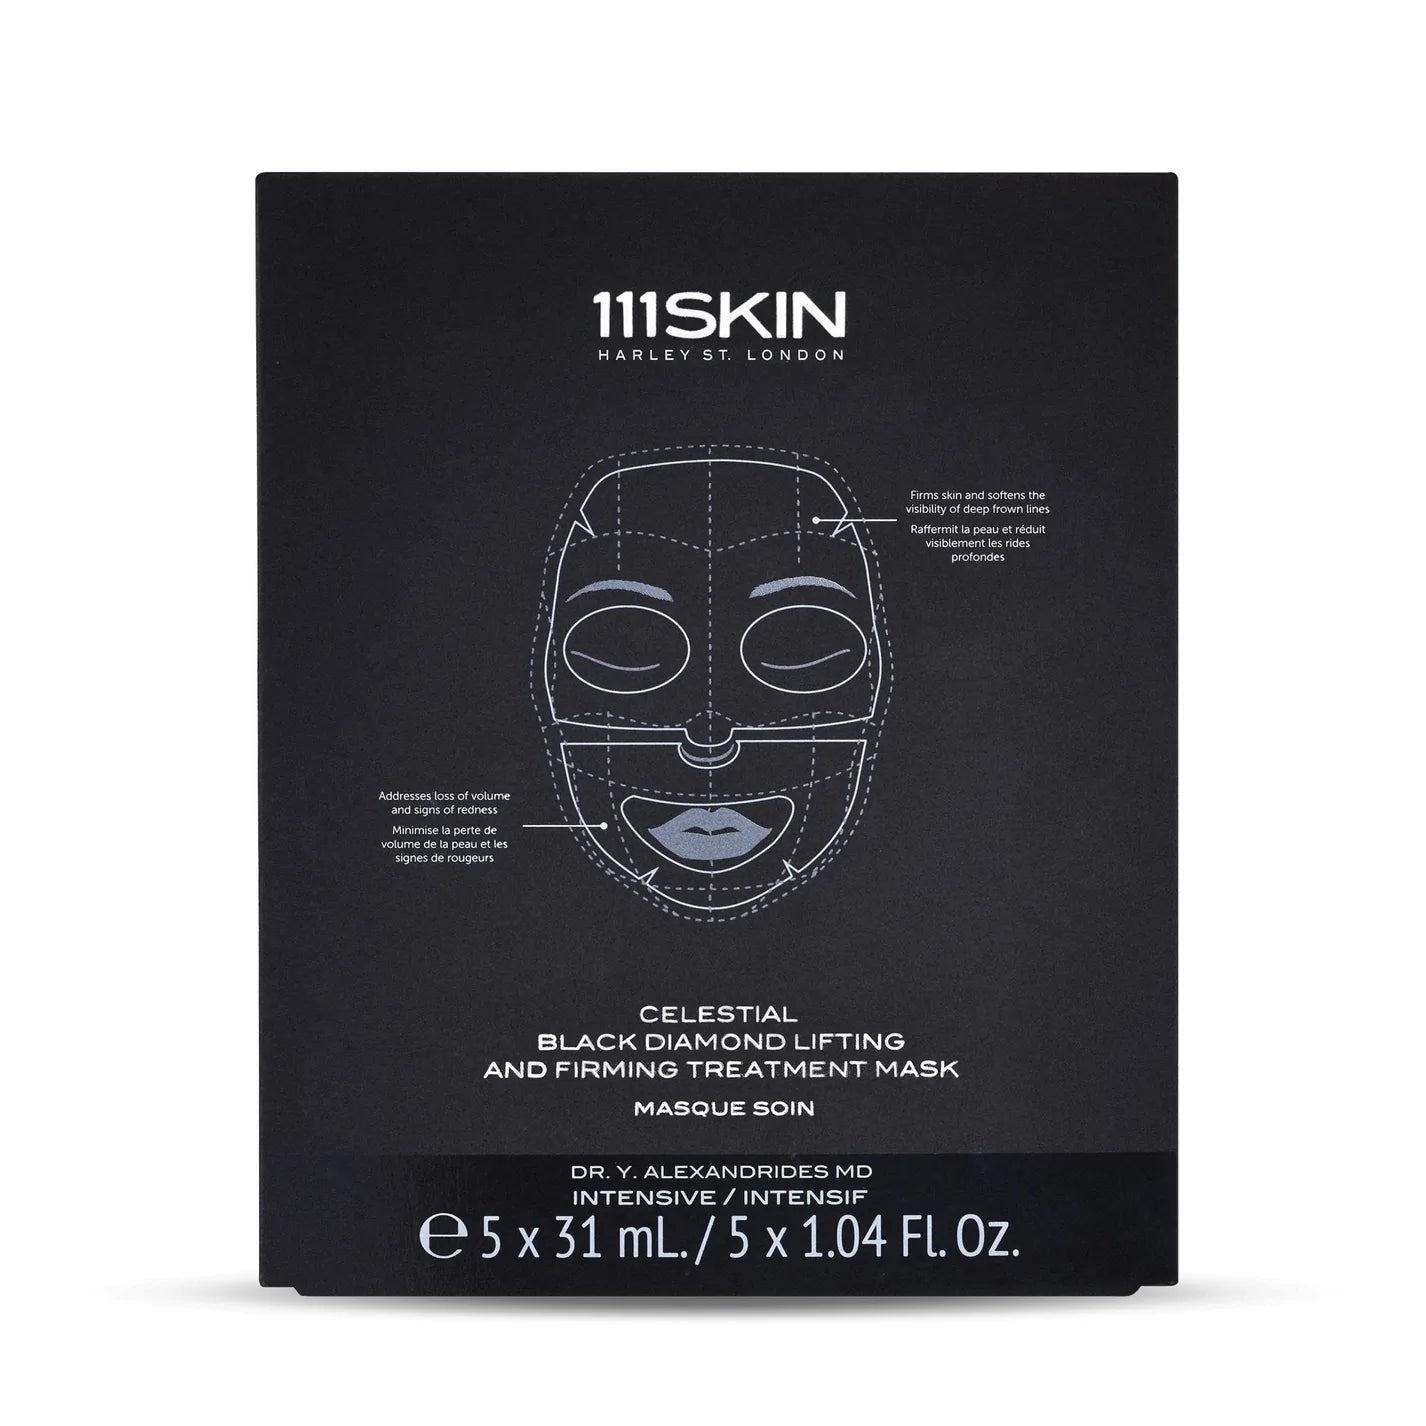 Obey Your Body porcelain instant face-lift mask